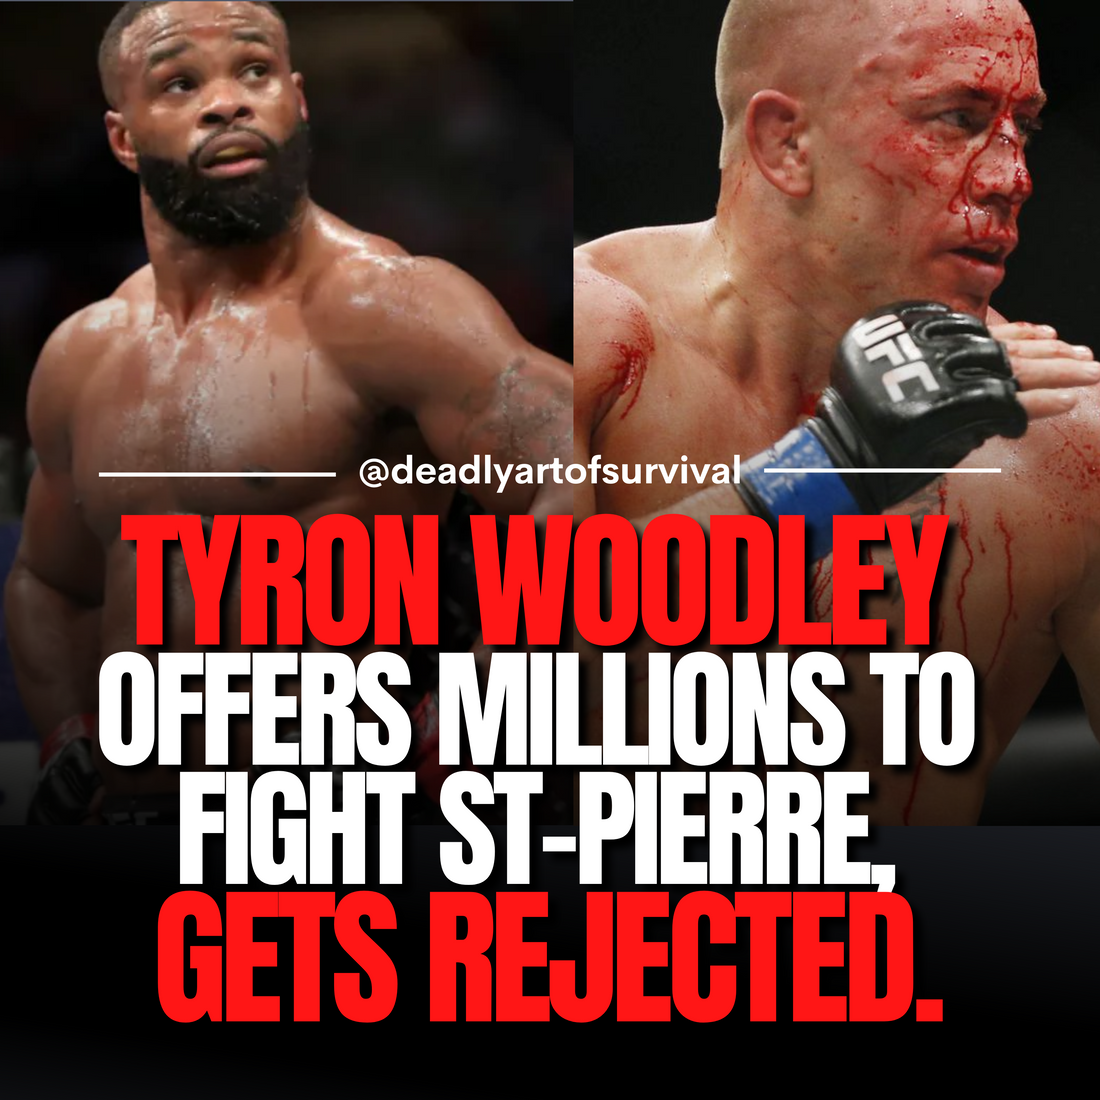 Tyron Woodley Offers Millions to Fight St-Pierre, But GSP Declines